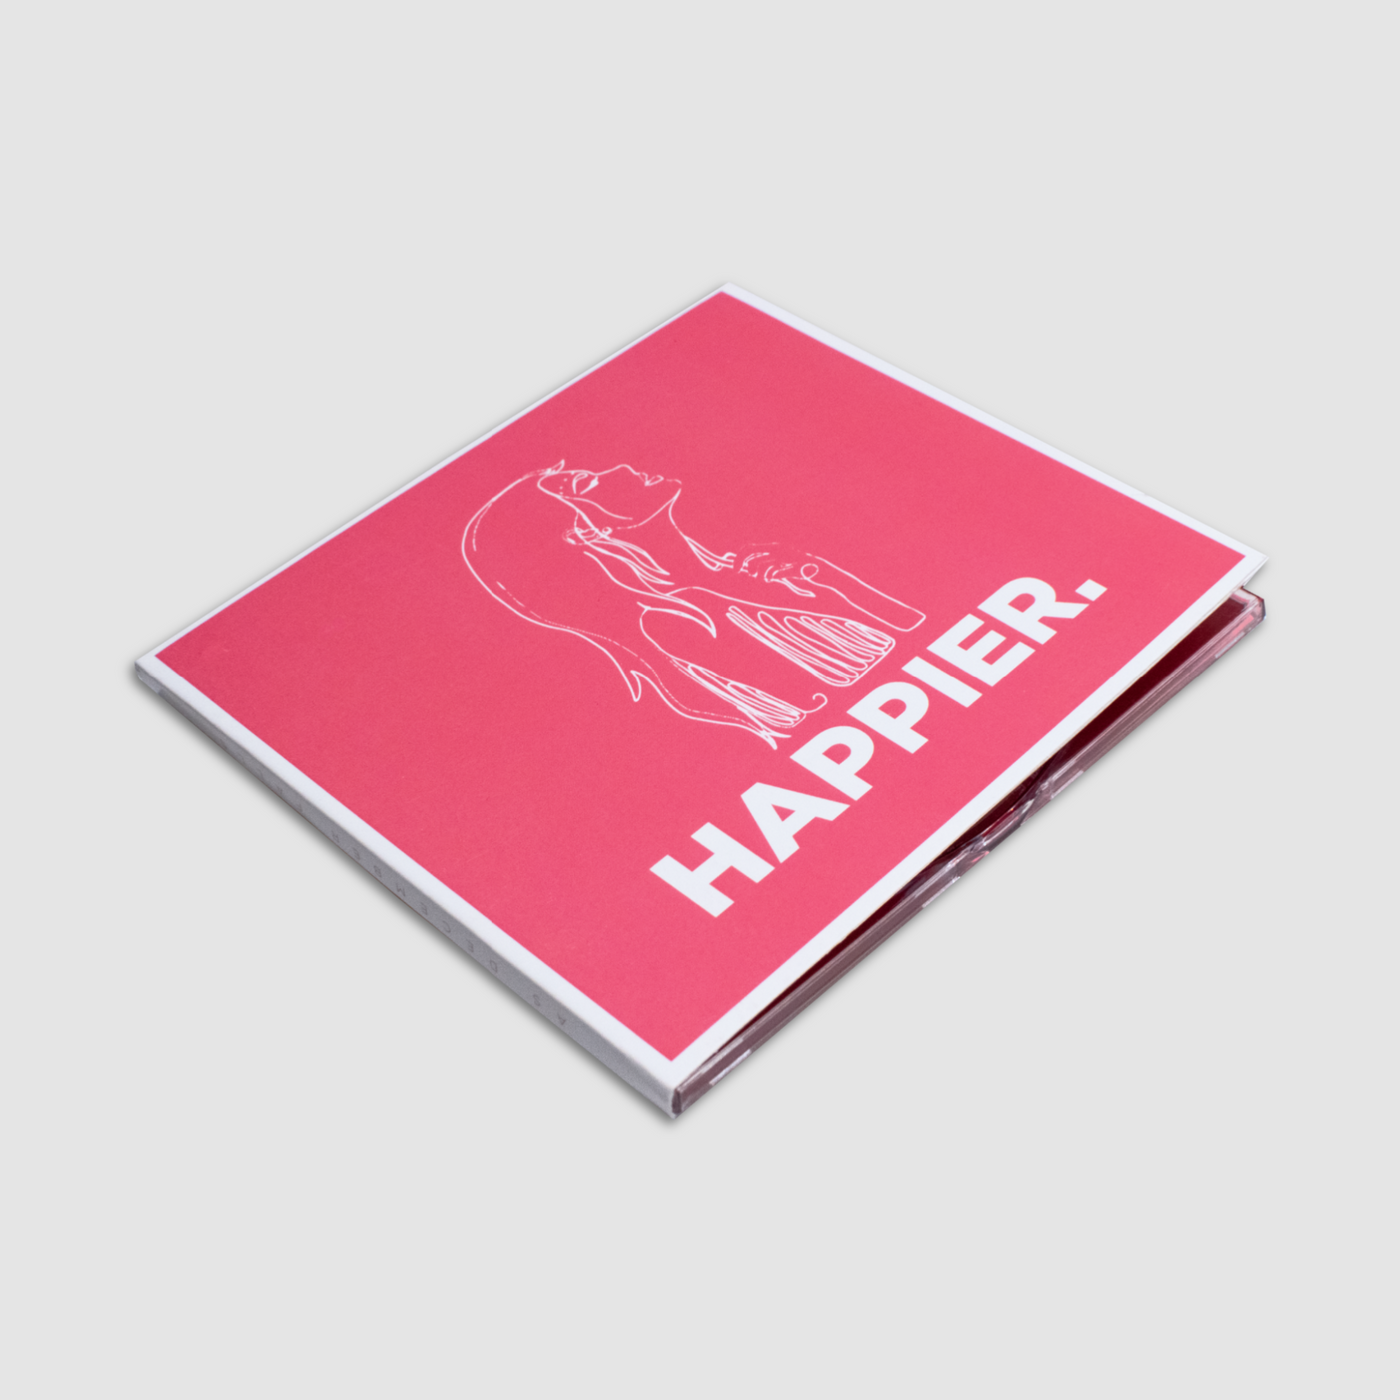 Signed Happier. - CD (Special Offer)